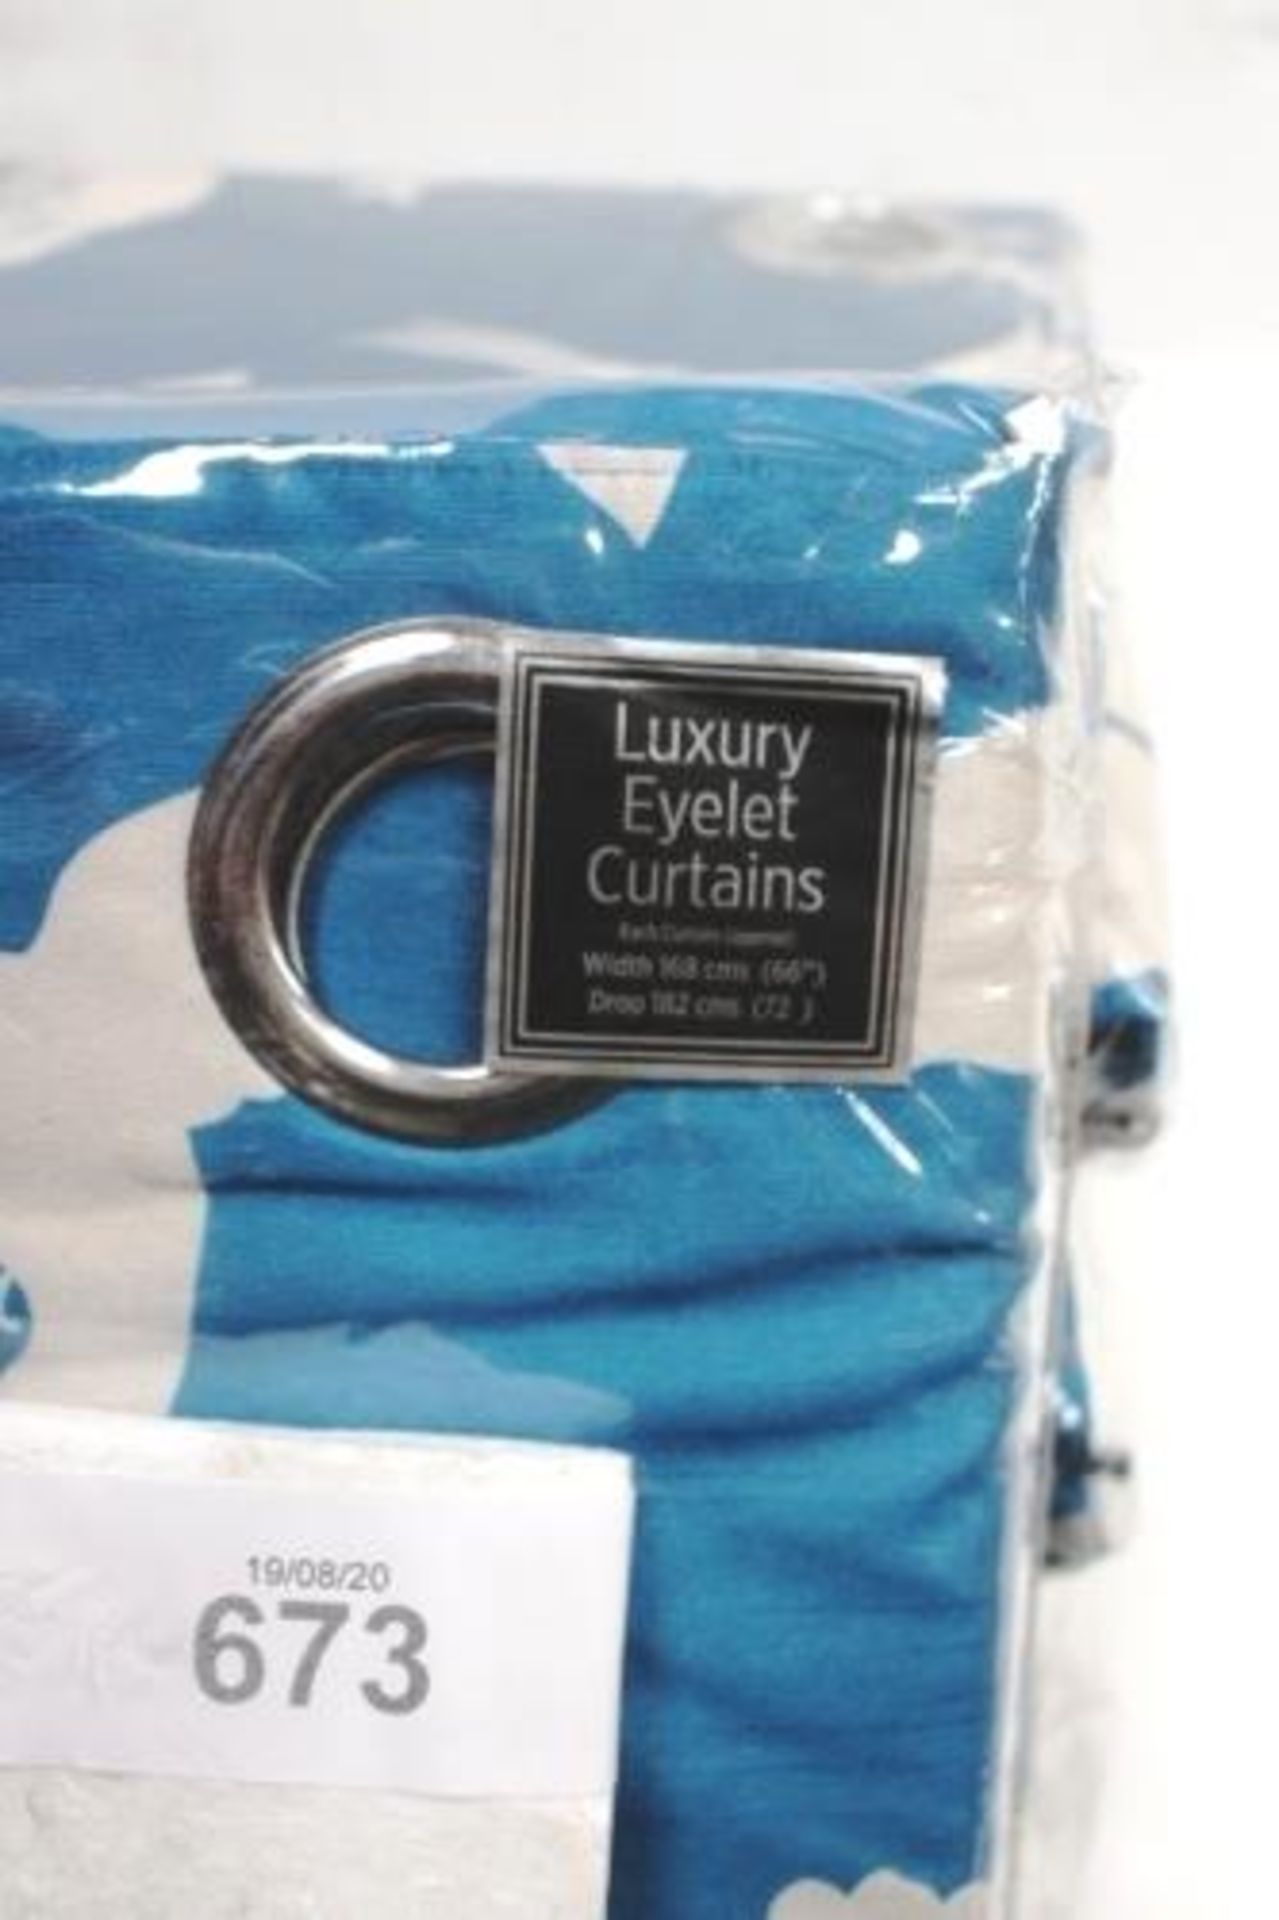 5 x pairs of Rosenthal Curtina teal lined eyelet silhouette floral curtains, size 168 x 182cm - - Image 3 of 3